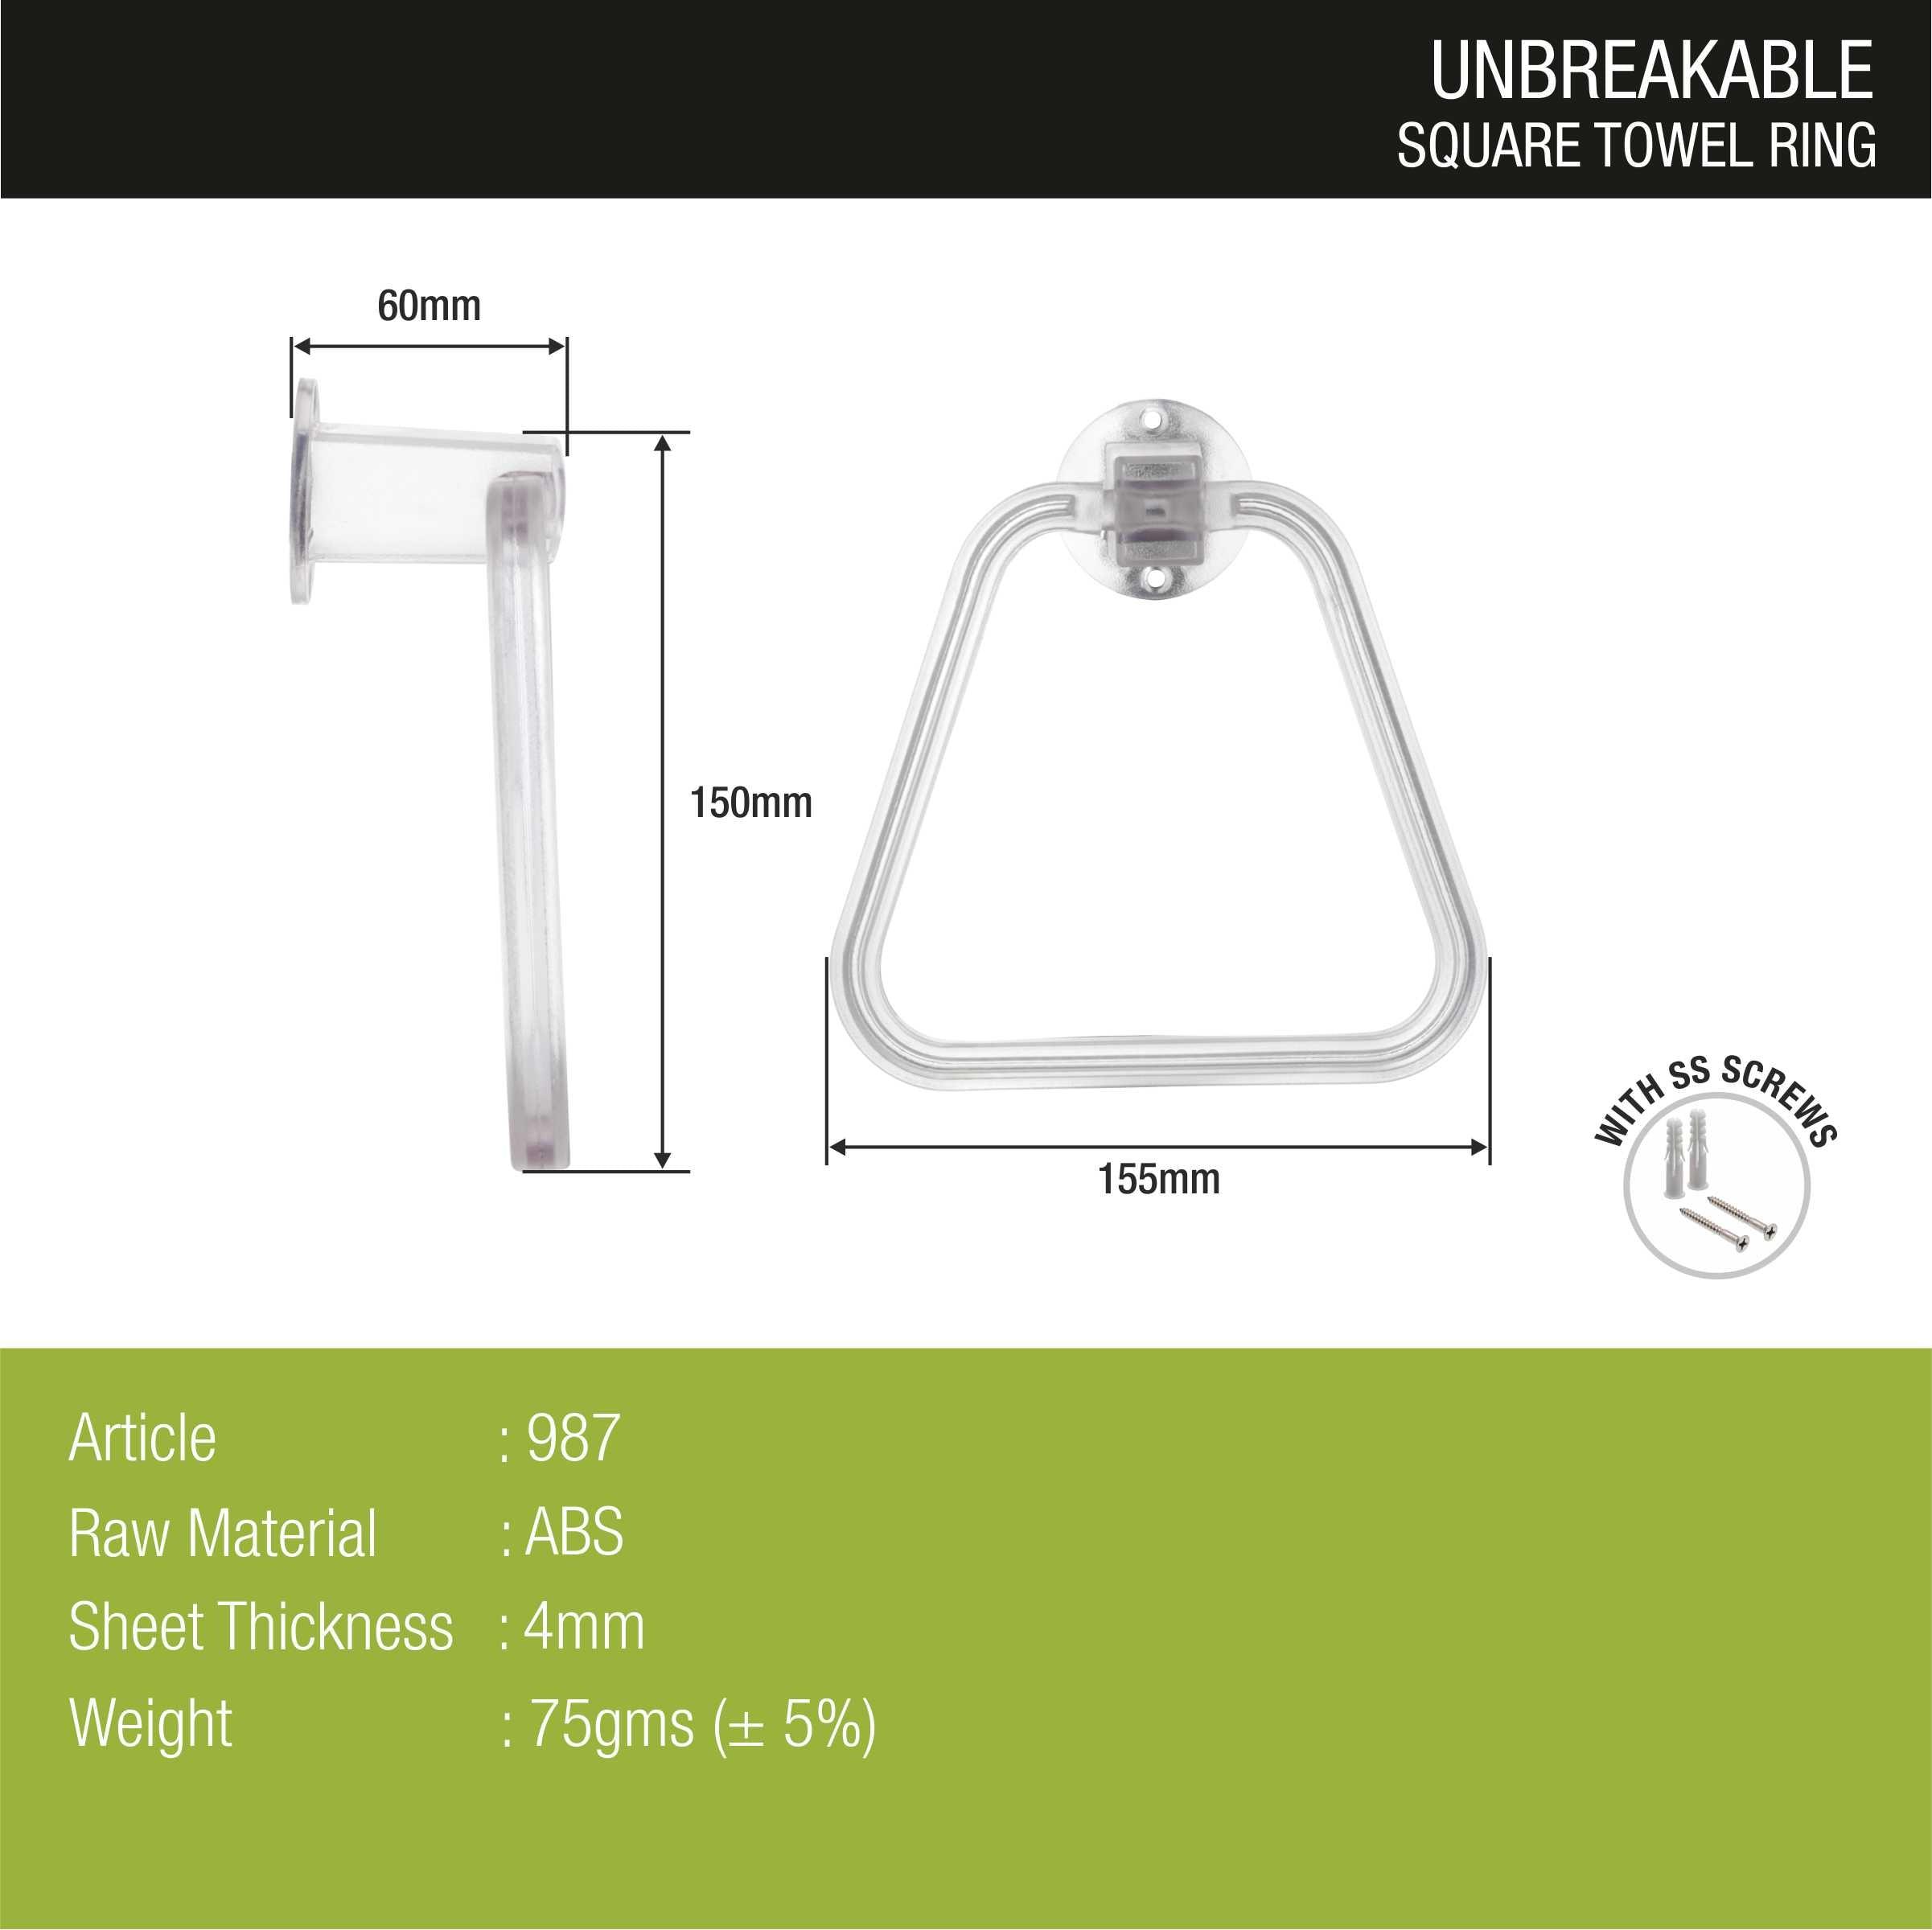 ABS Square Towel Ring dimensions and sizes